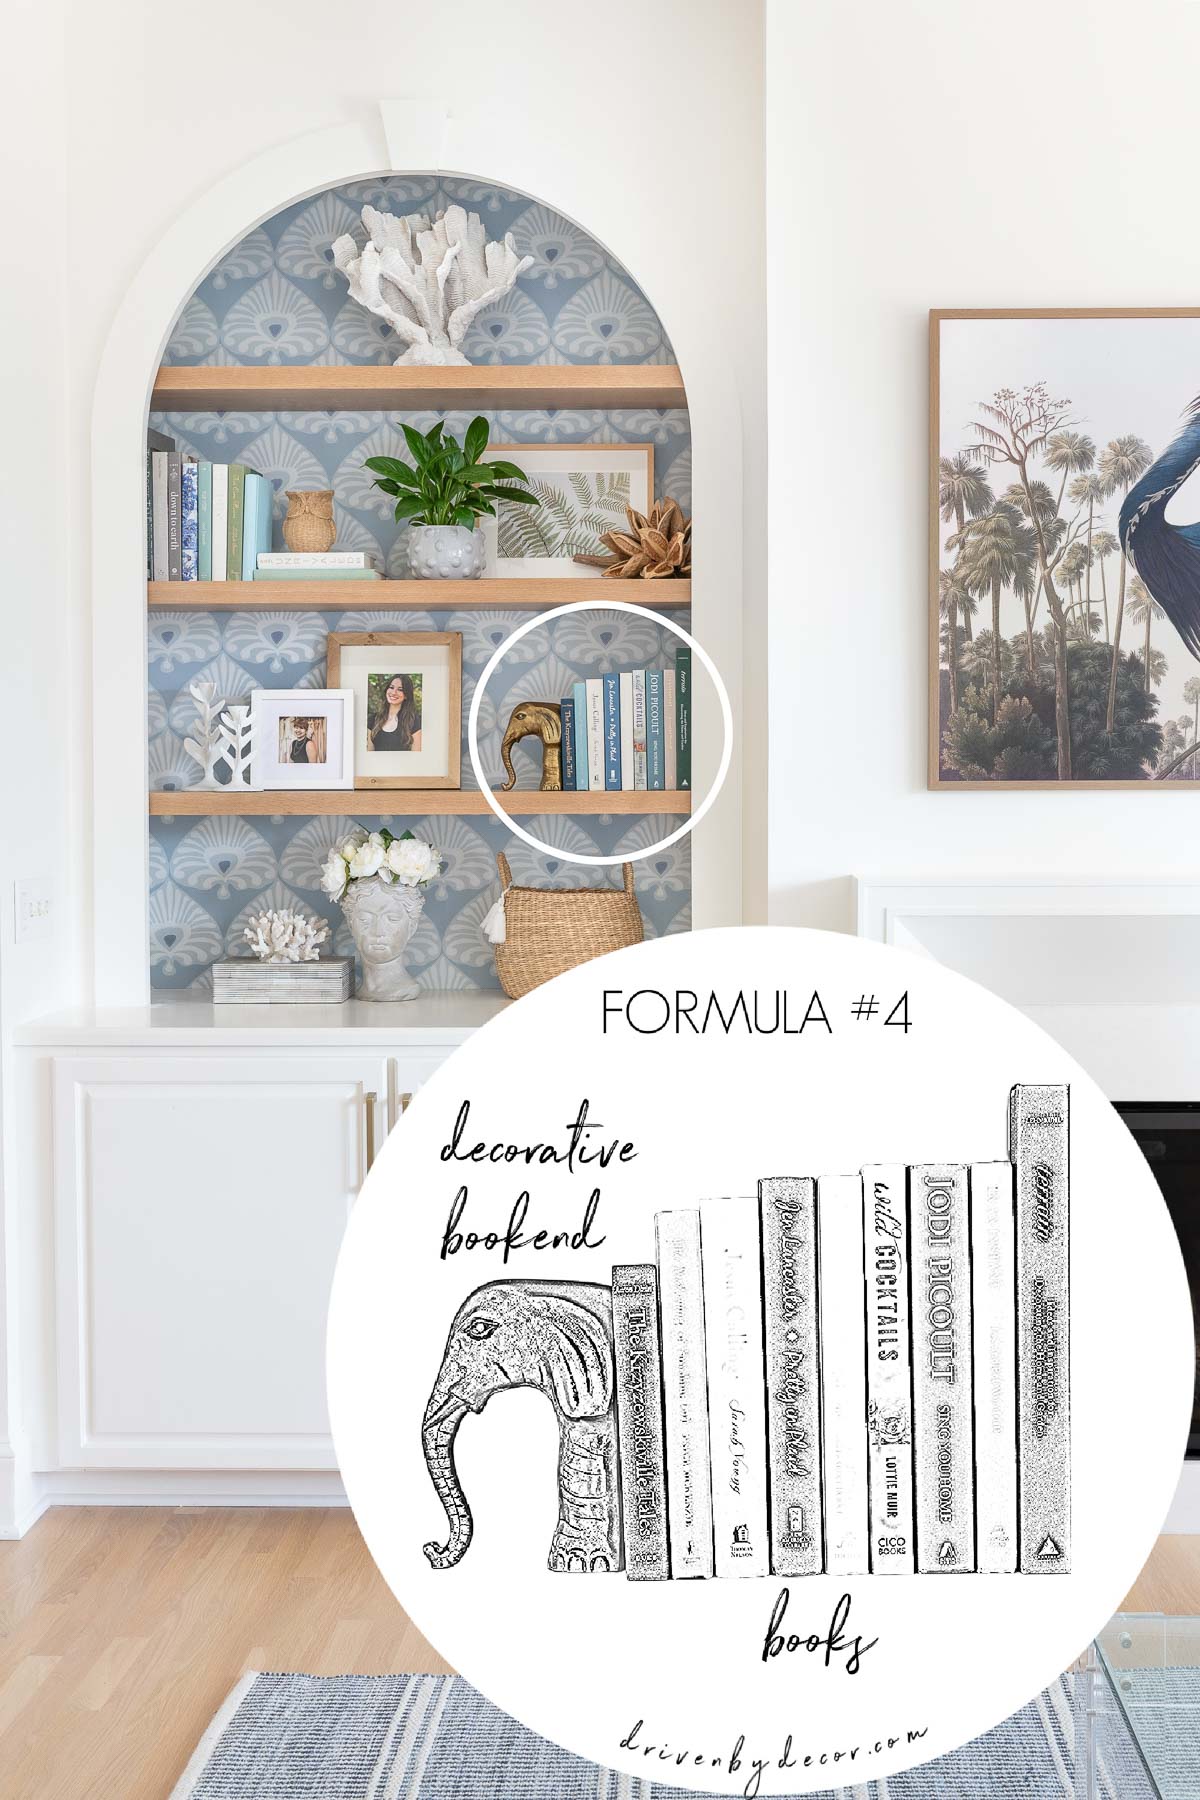 A decorative elephant bookend plus a series of books - tip for how to decorate a bookcase